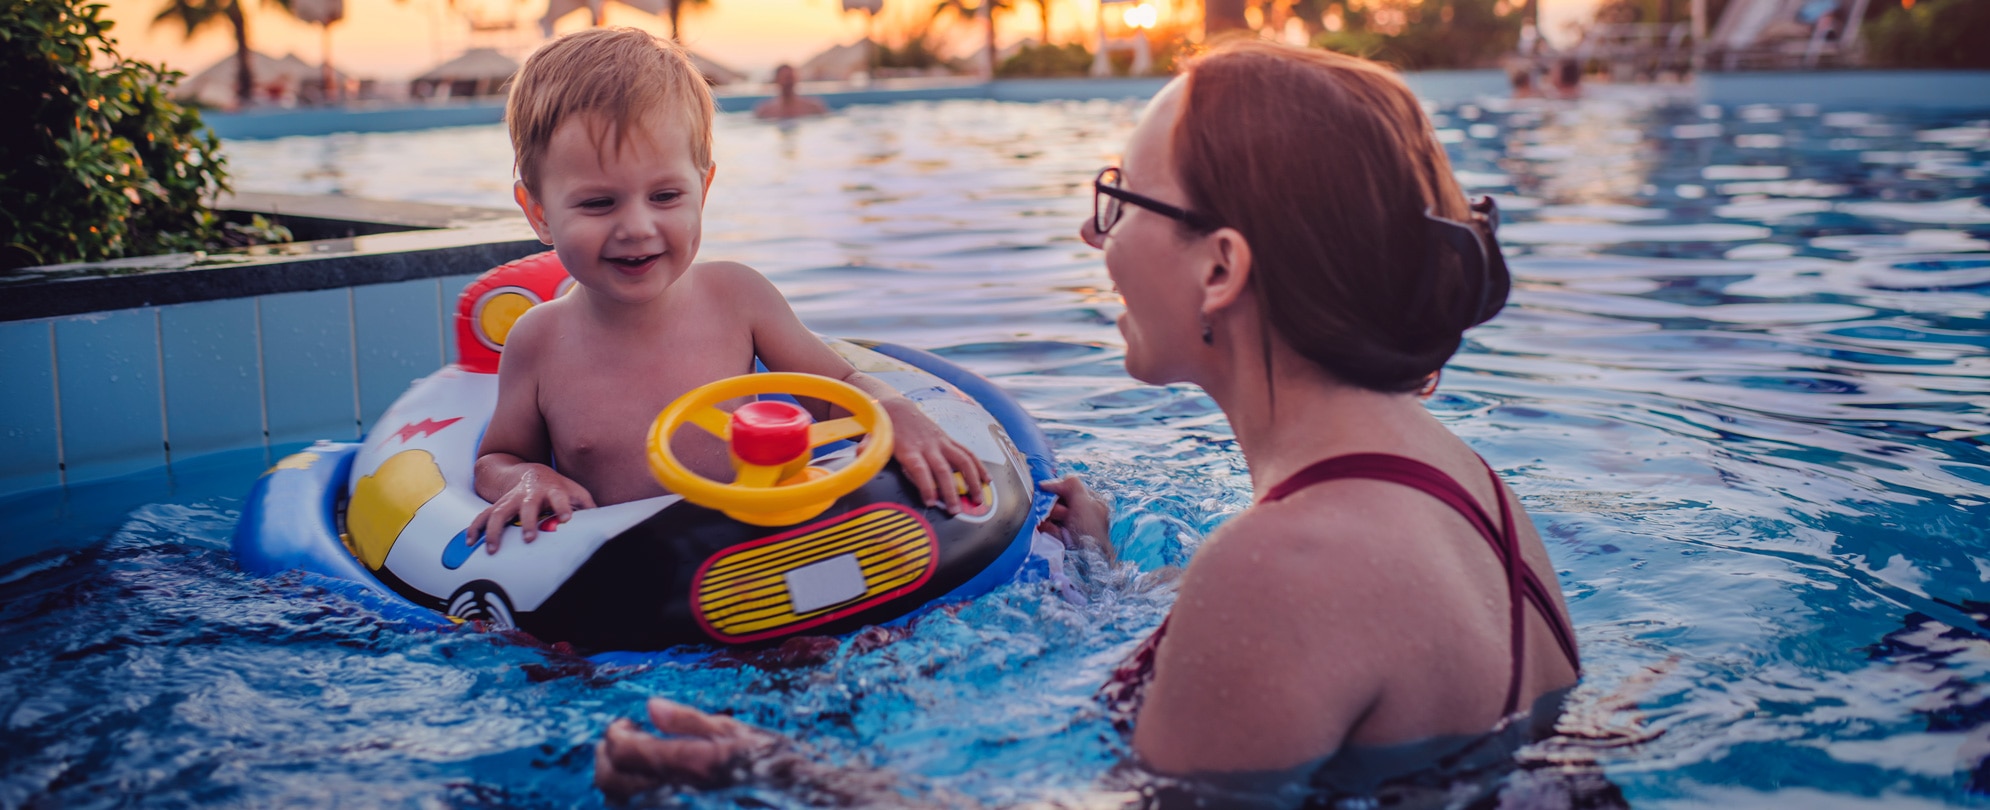 Mother talking to baby son on a pool float 